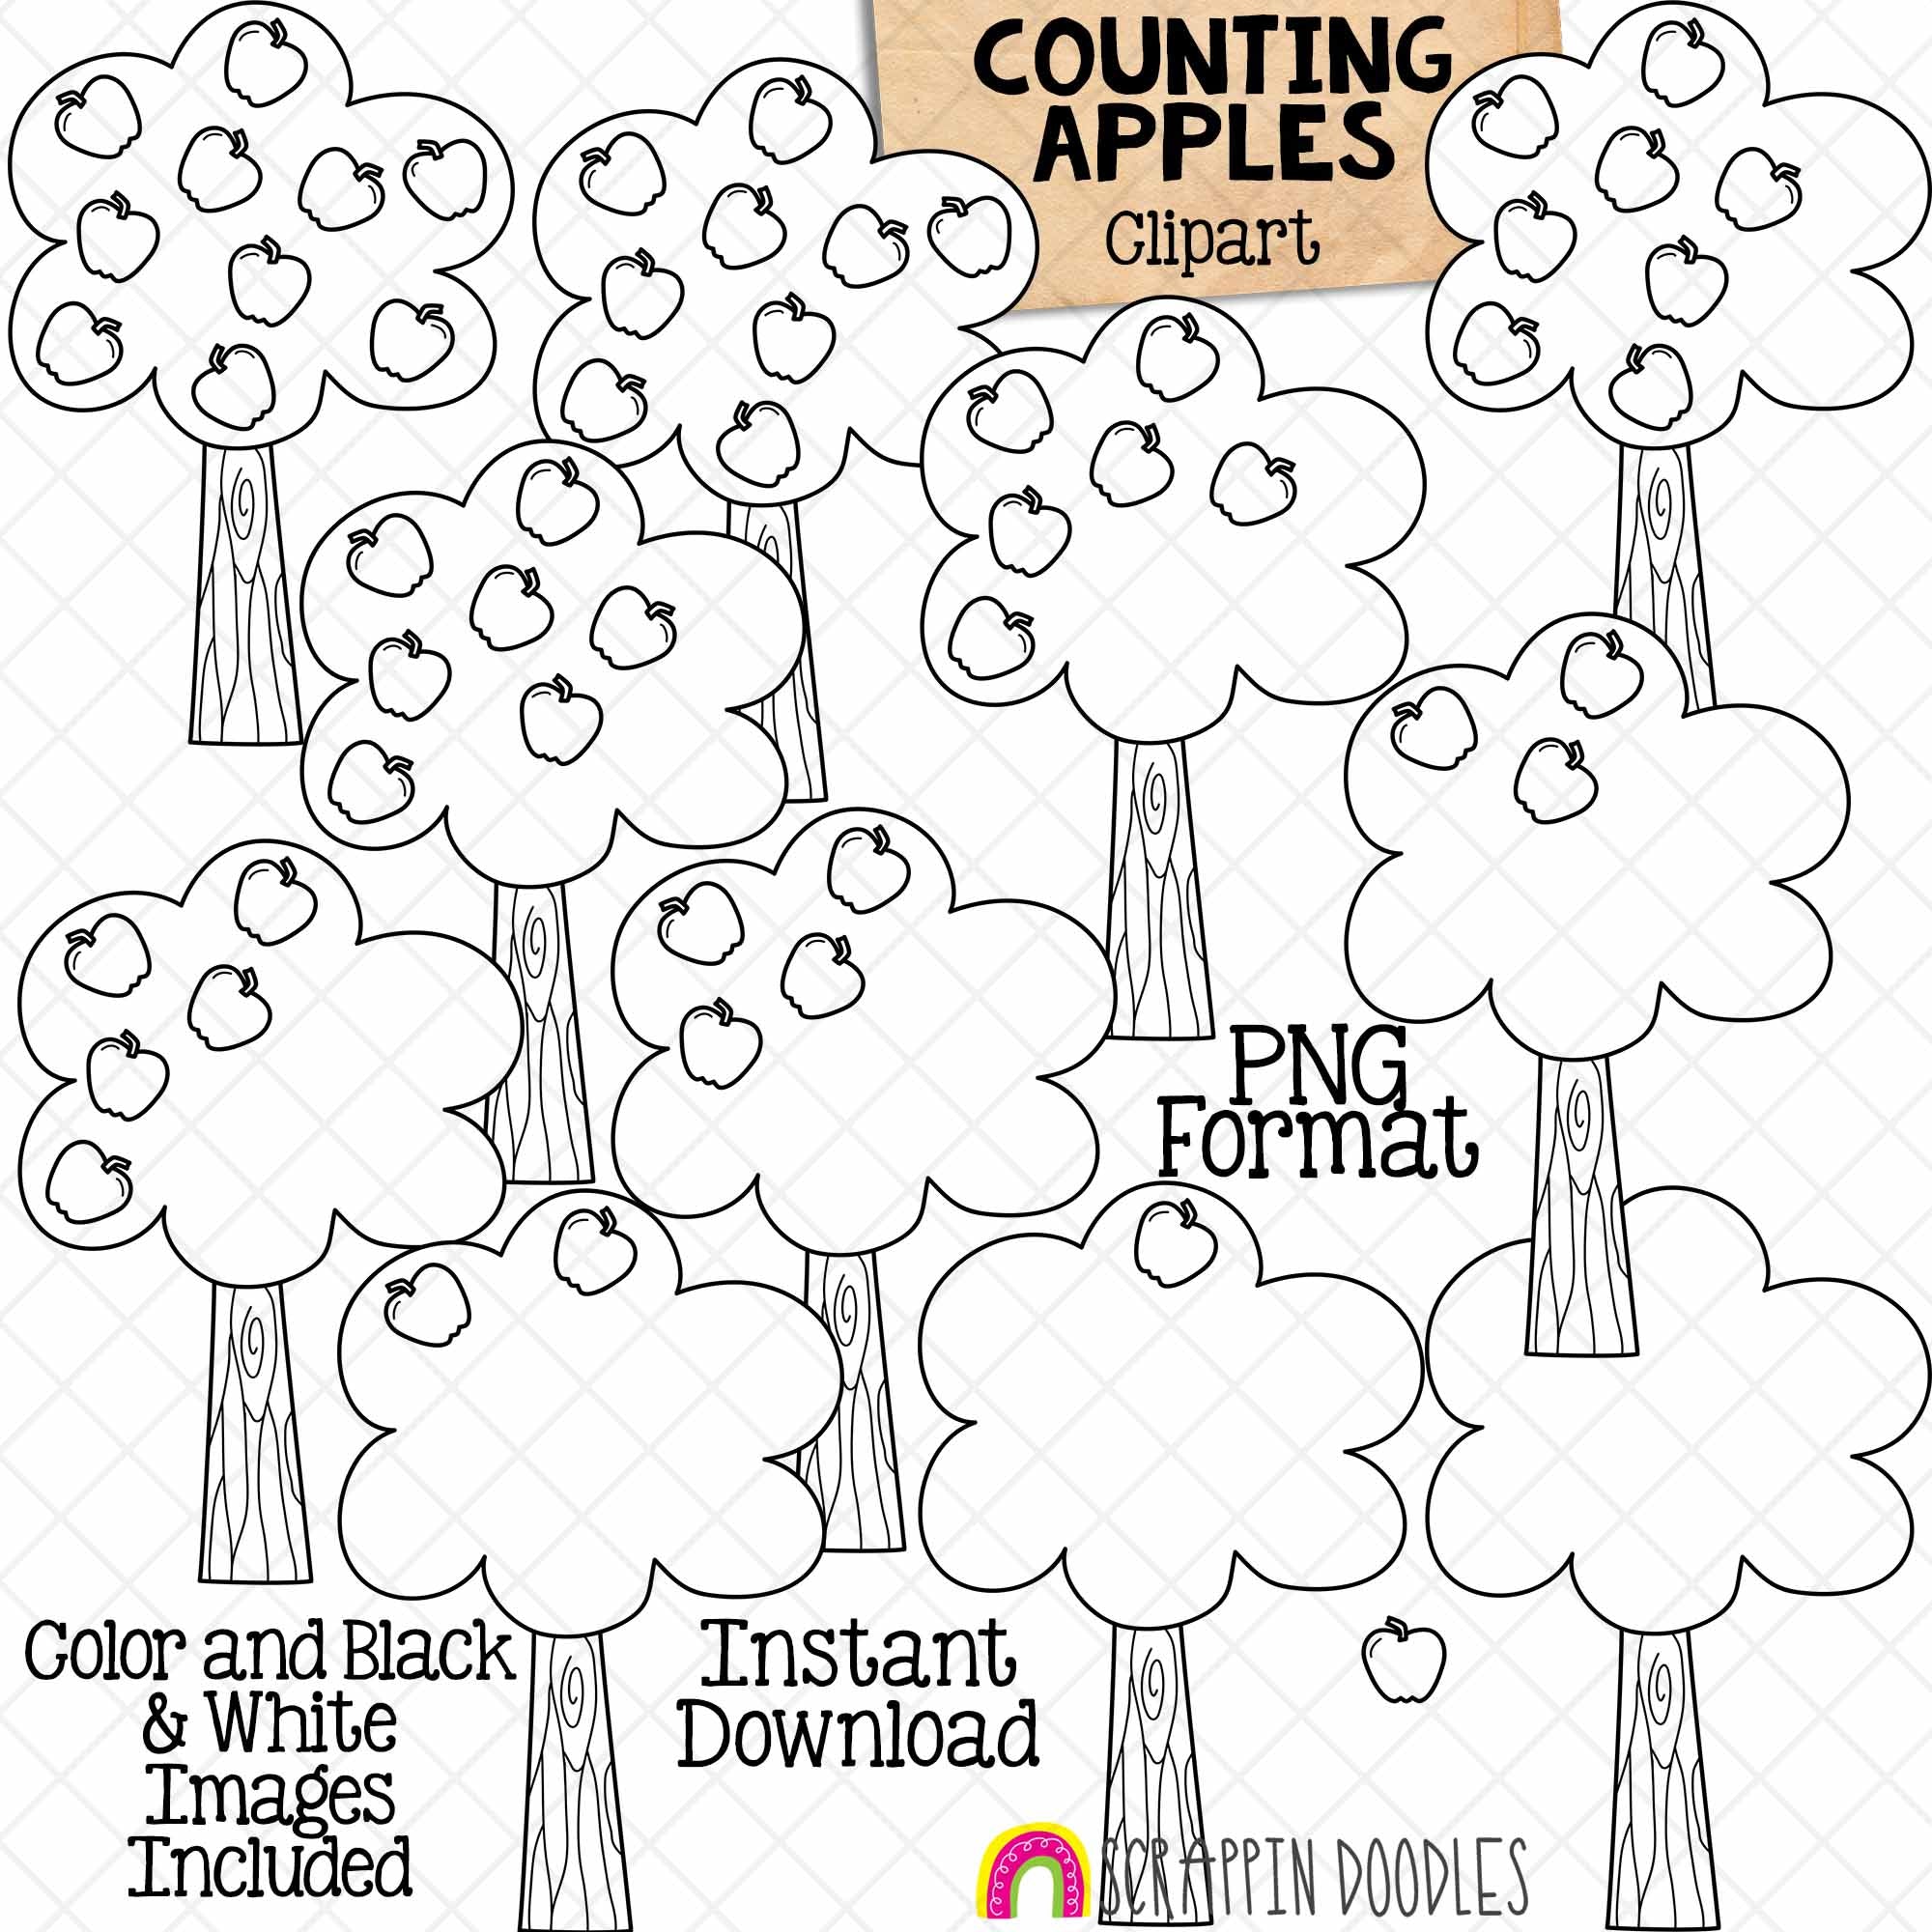 apple tree clipart black and white